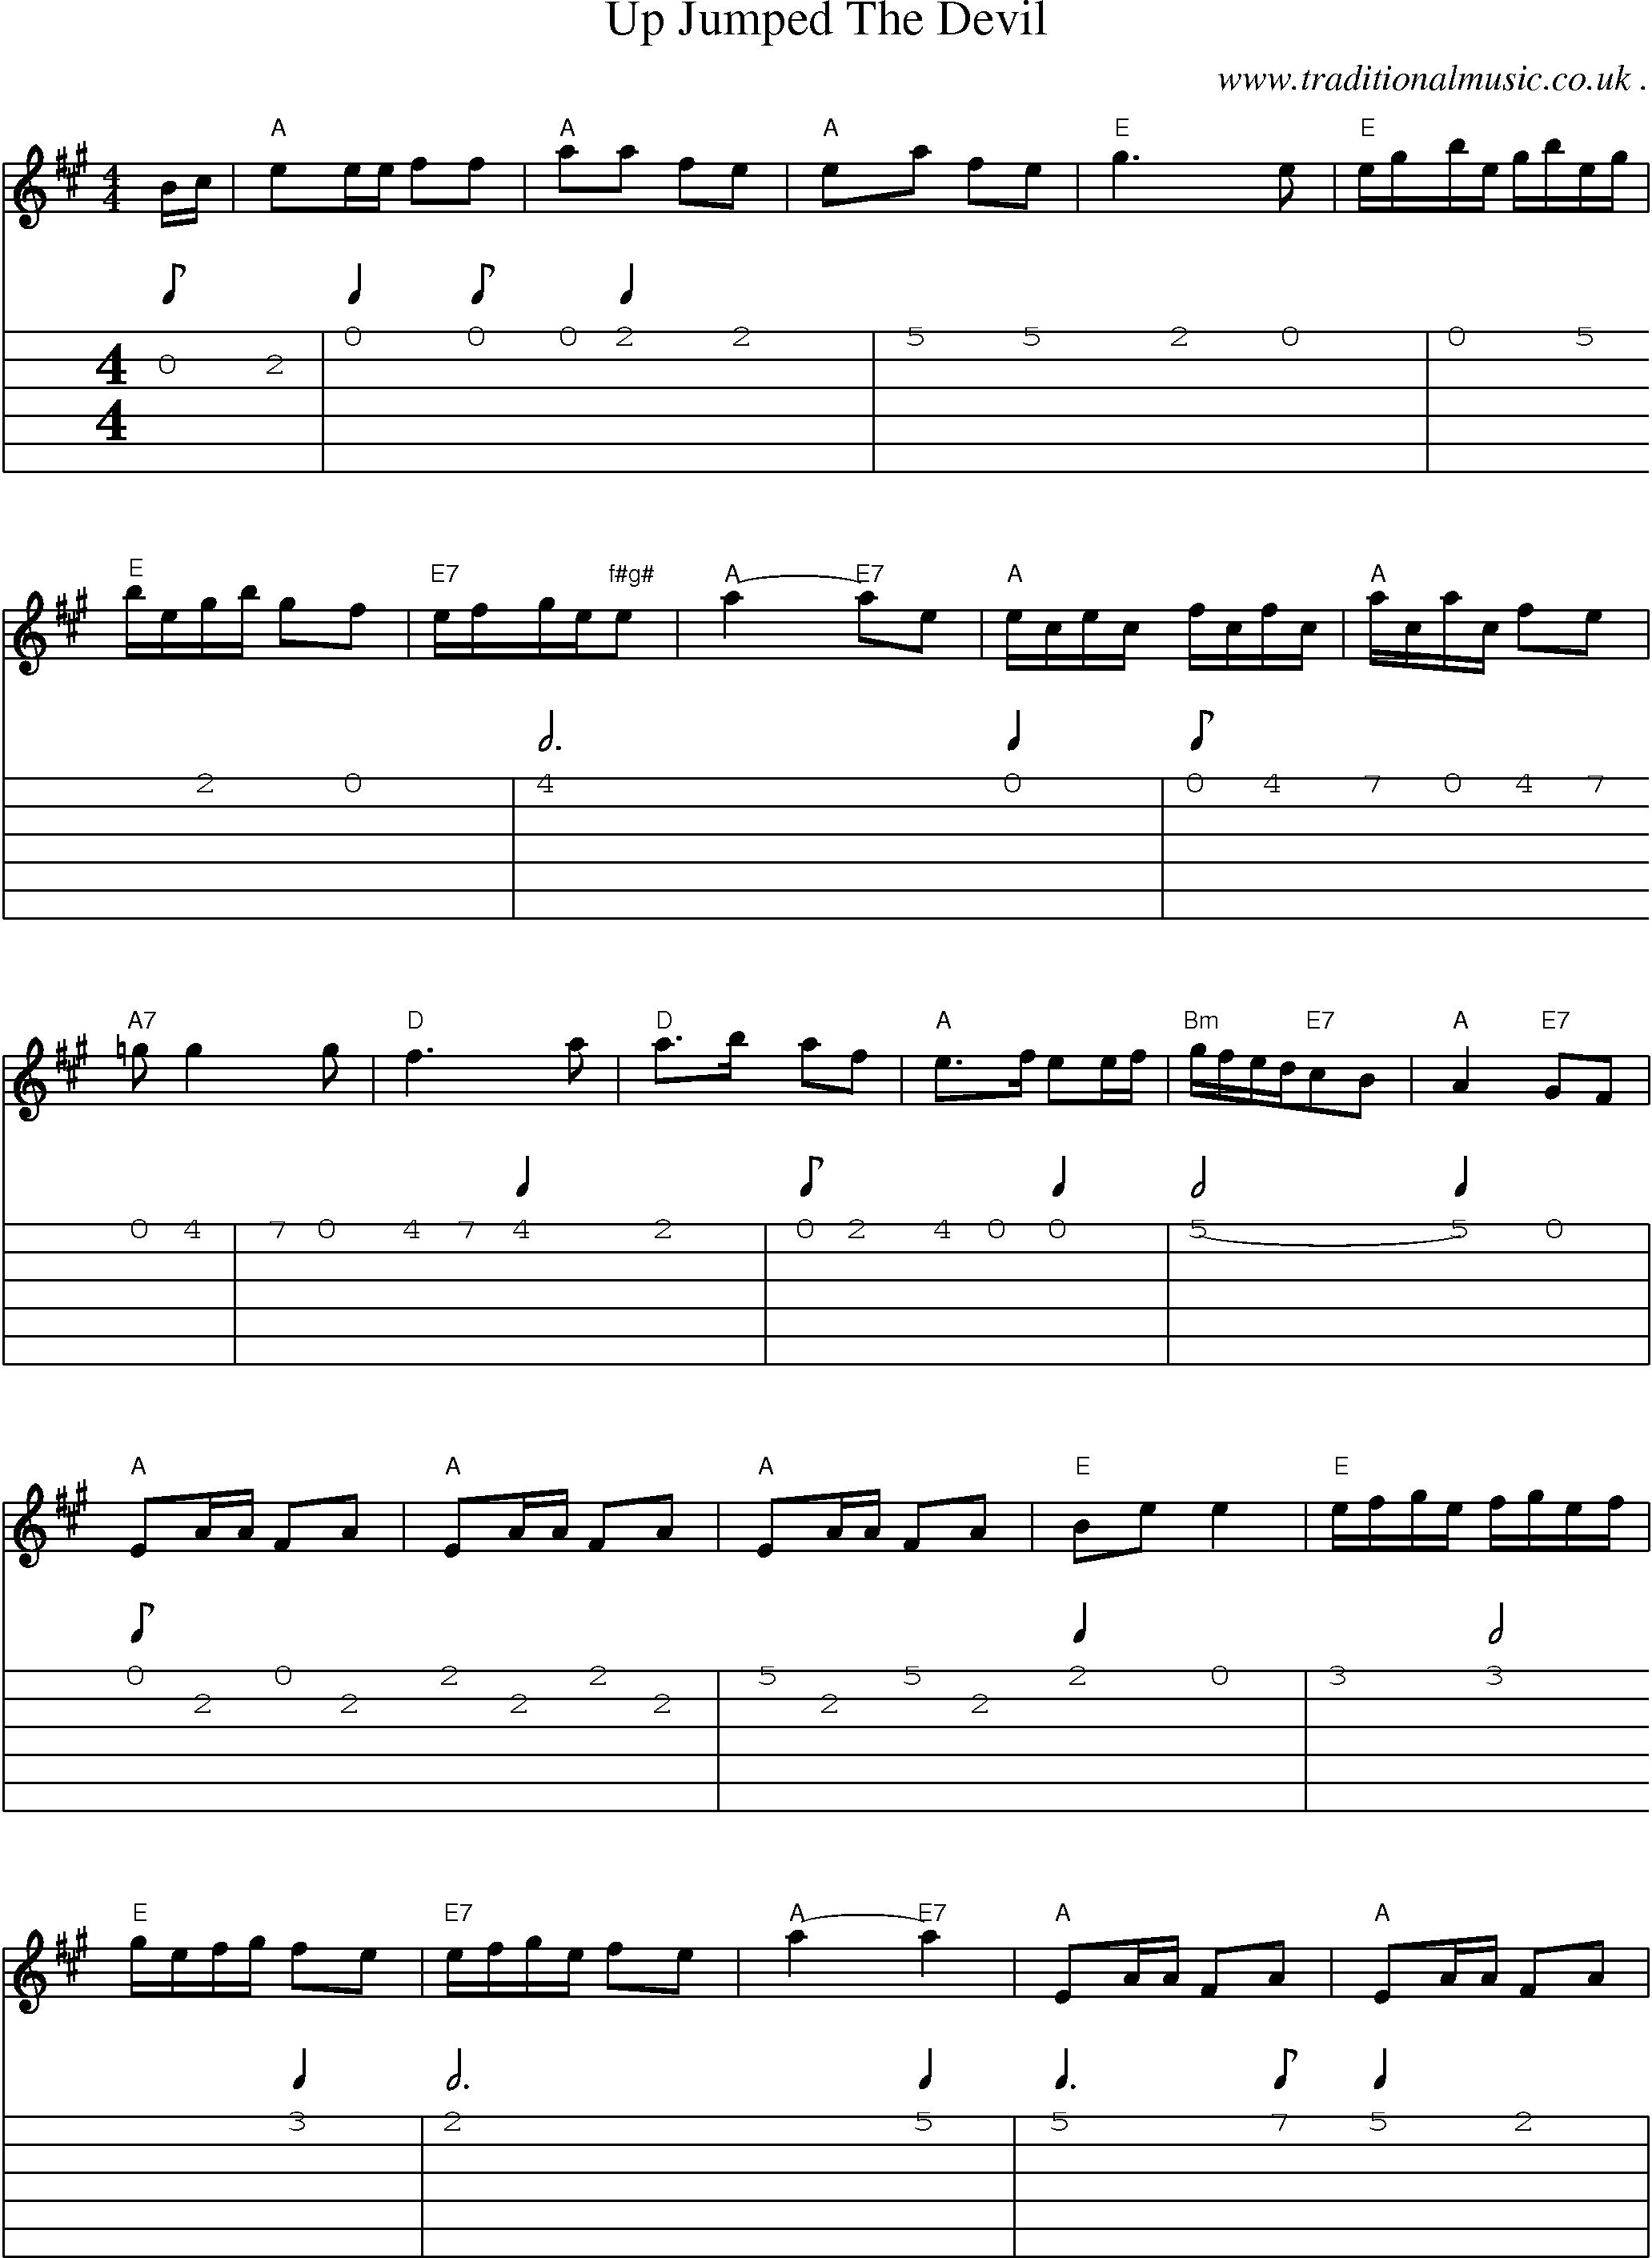 Sheet-Music and Guitar Tabs for Up Jumped The Devil